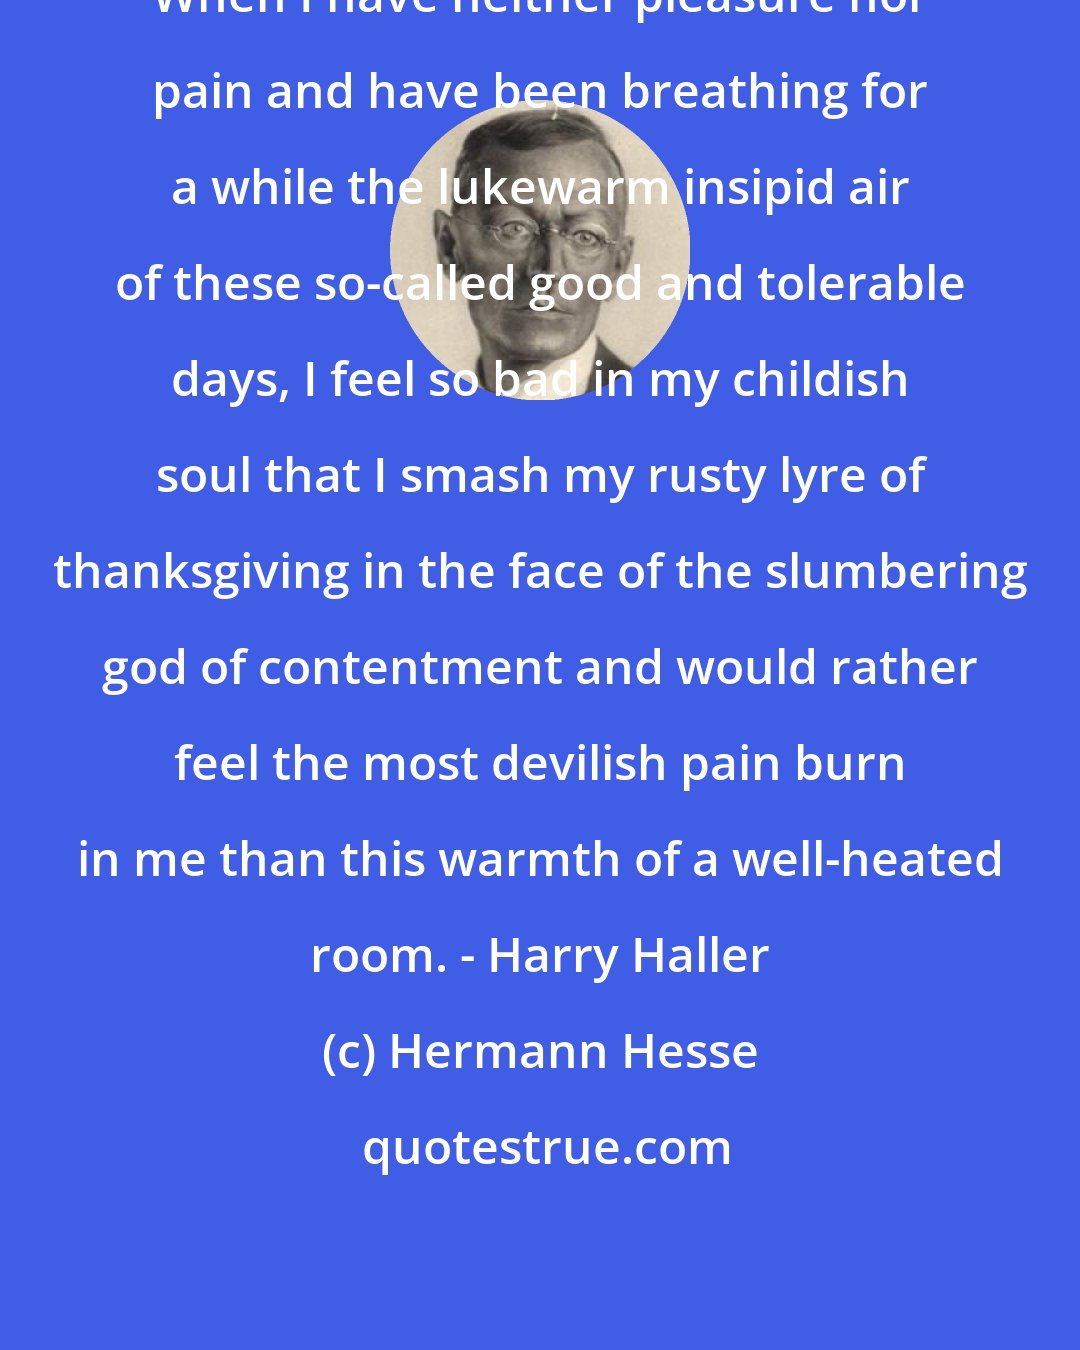 Hermann Hesse: When I have neither pleasure nor pain and have been breathing for a while the lukewarm insipid air of these so-called good and tolerable days, I feel so bad in my childish soul that I smash my rusty lyre of thanksgiving in the face of the slumbering god of contentment and would rather feel the most devilish pain burn in me than this warmth of a well-heated room. - Harry Haller